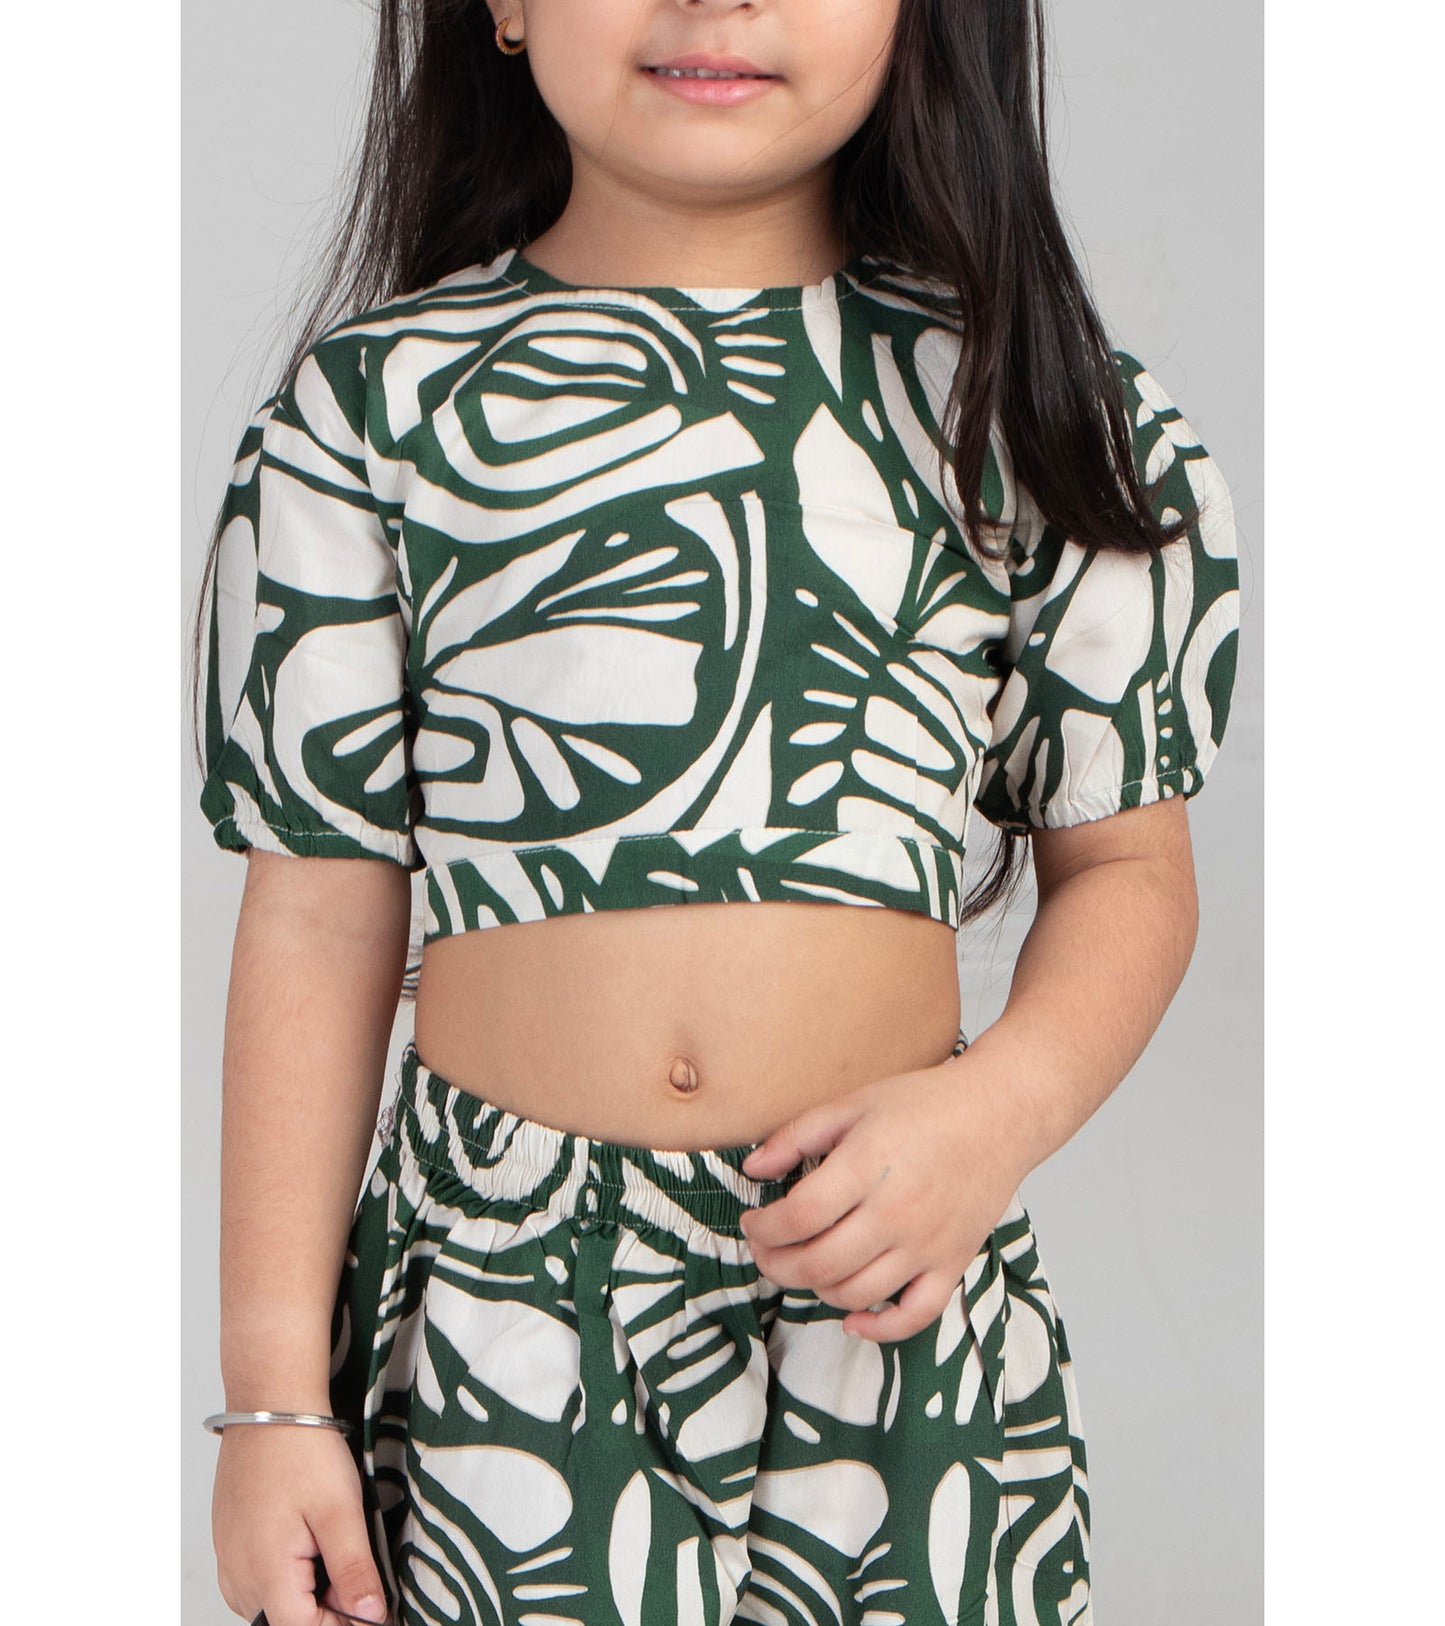 Graffiti Allover Printed Co ord Sets For Girls